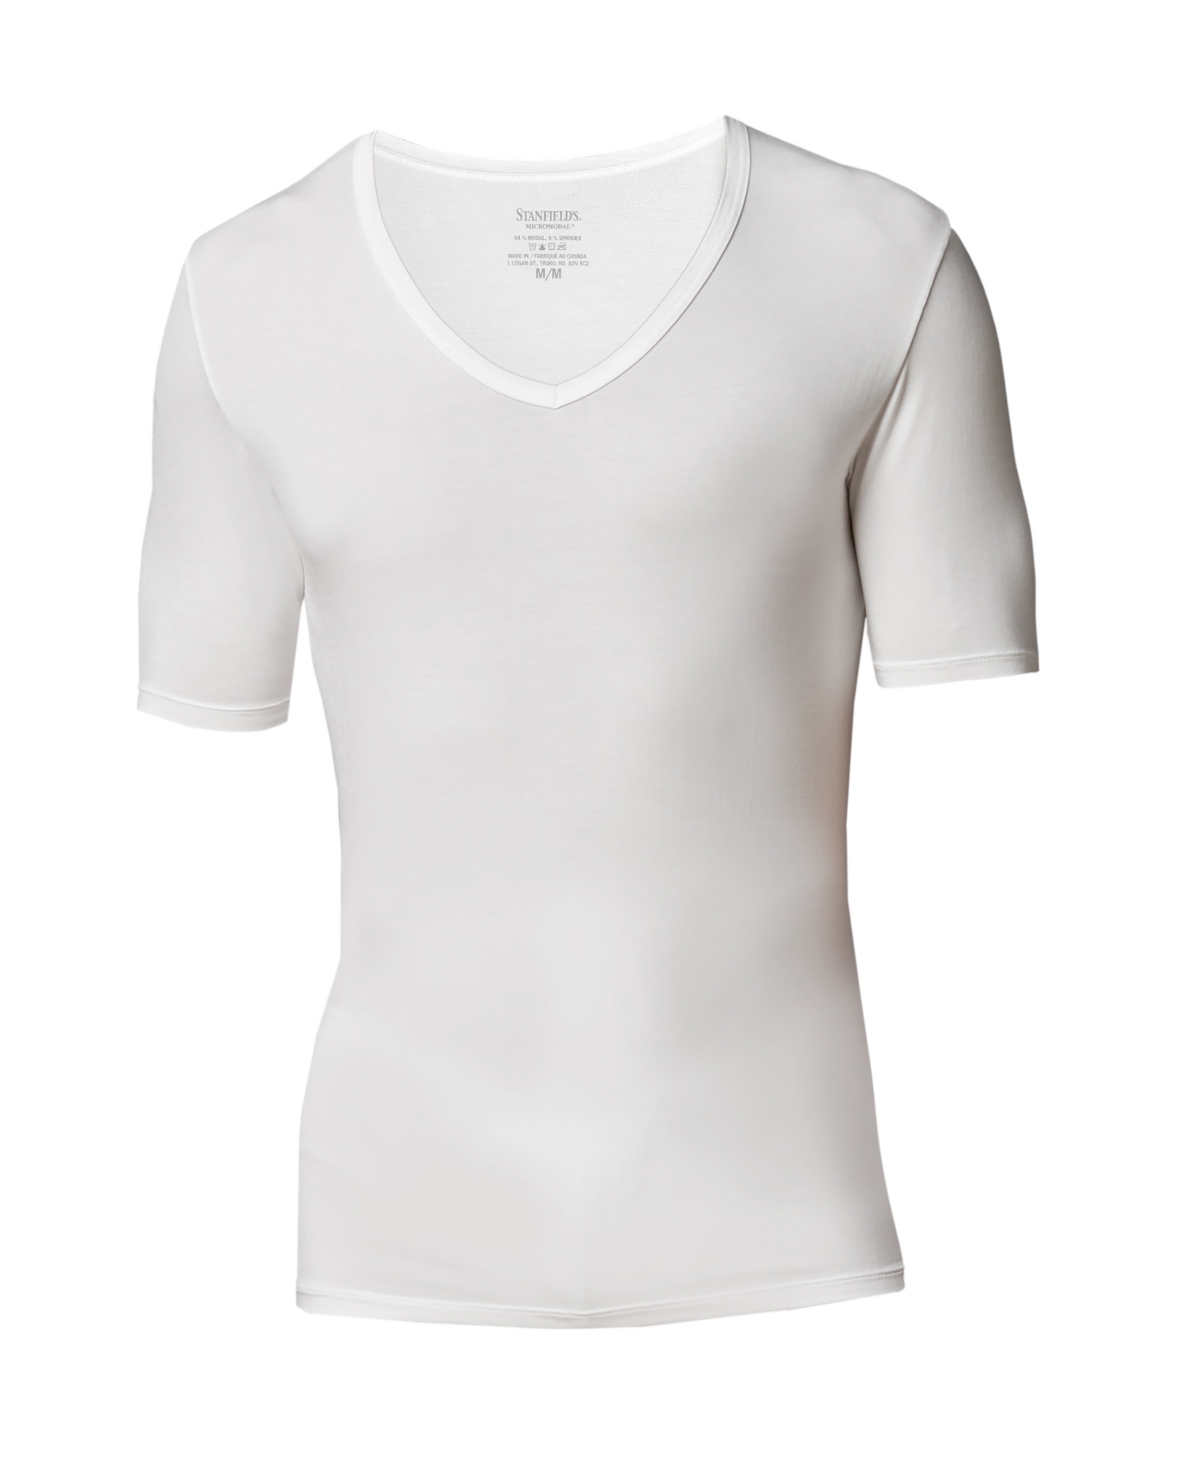 Stanfield's Men's Invisible Deep V-neck Undershirt In White